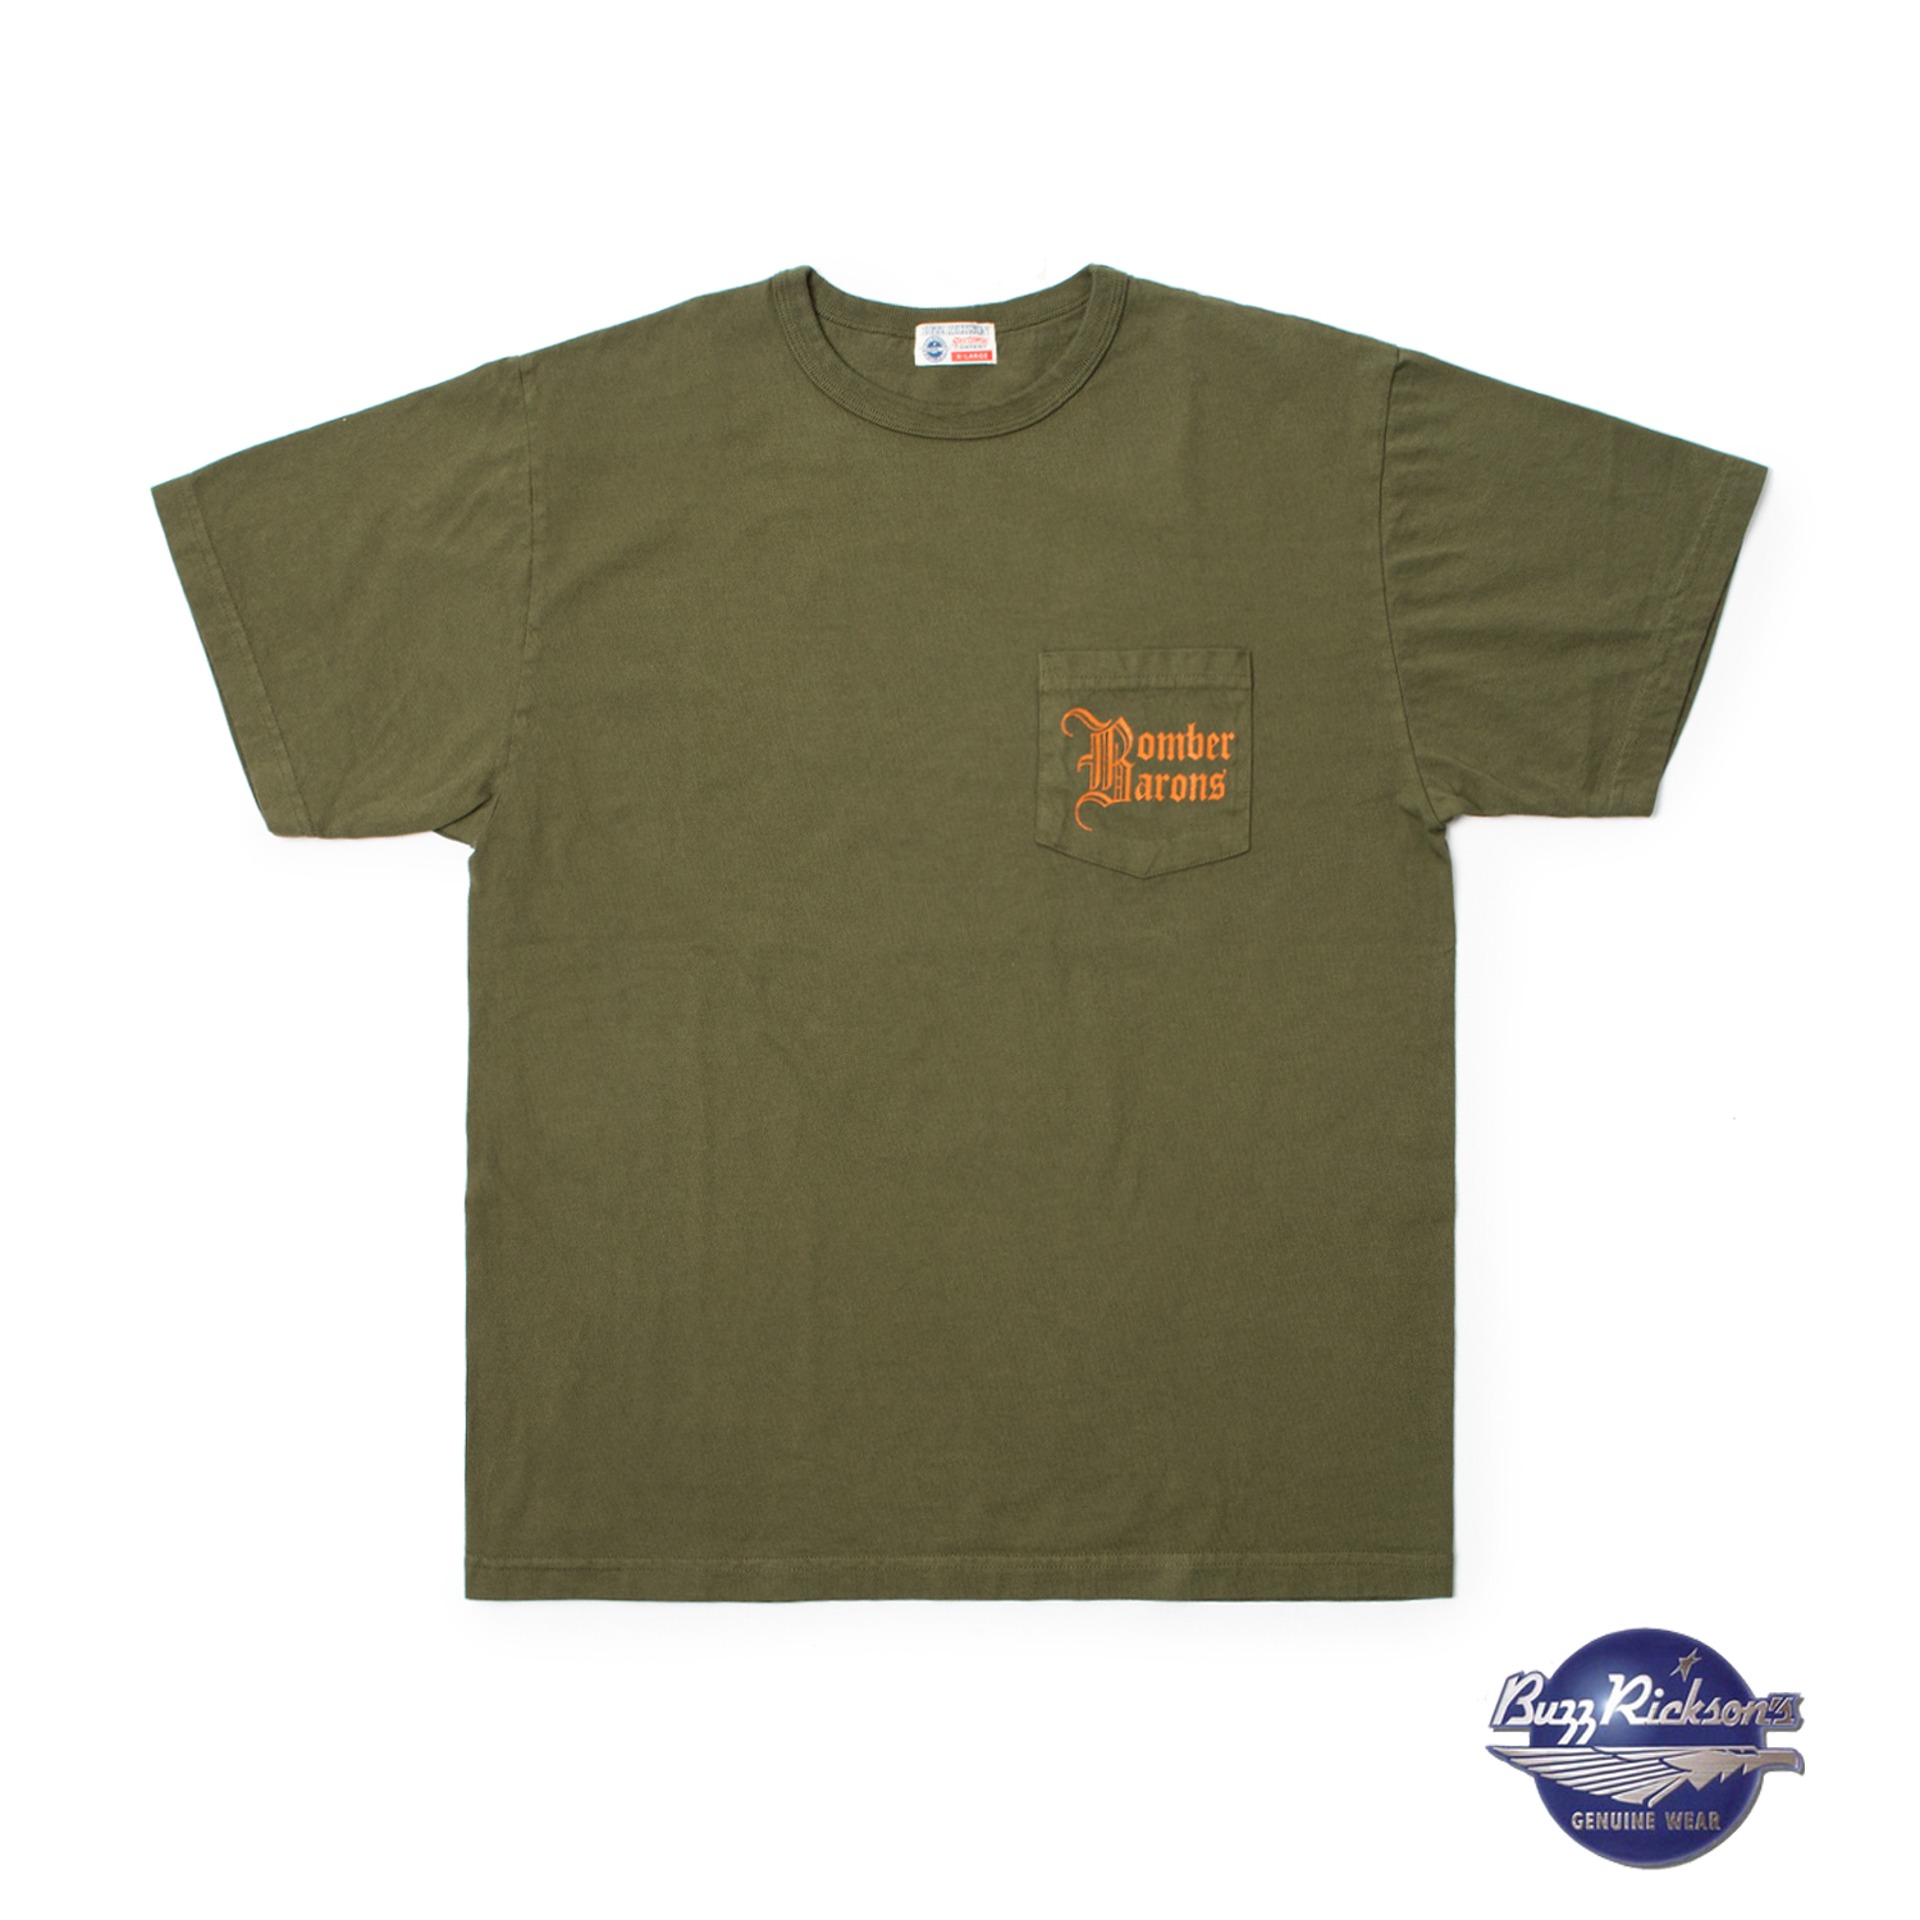 LOOPWHEEL S/S MILITARY TEE &quot;BOMBER BARONS&quot; (Olive)